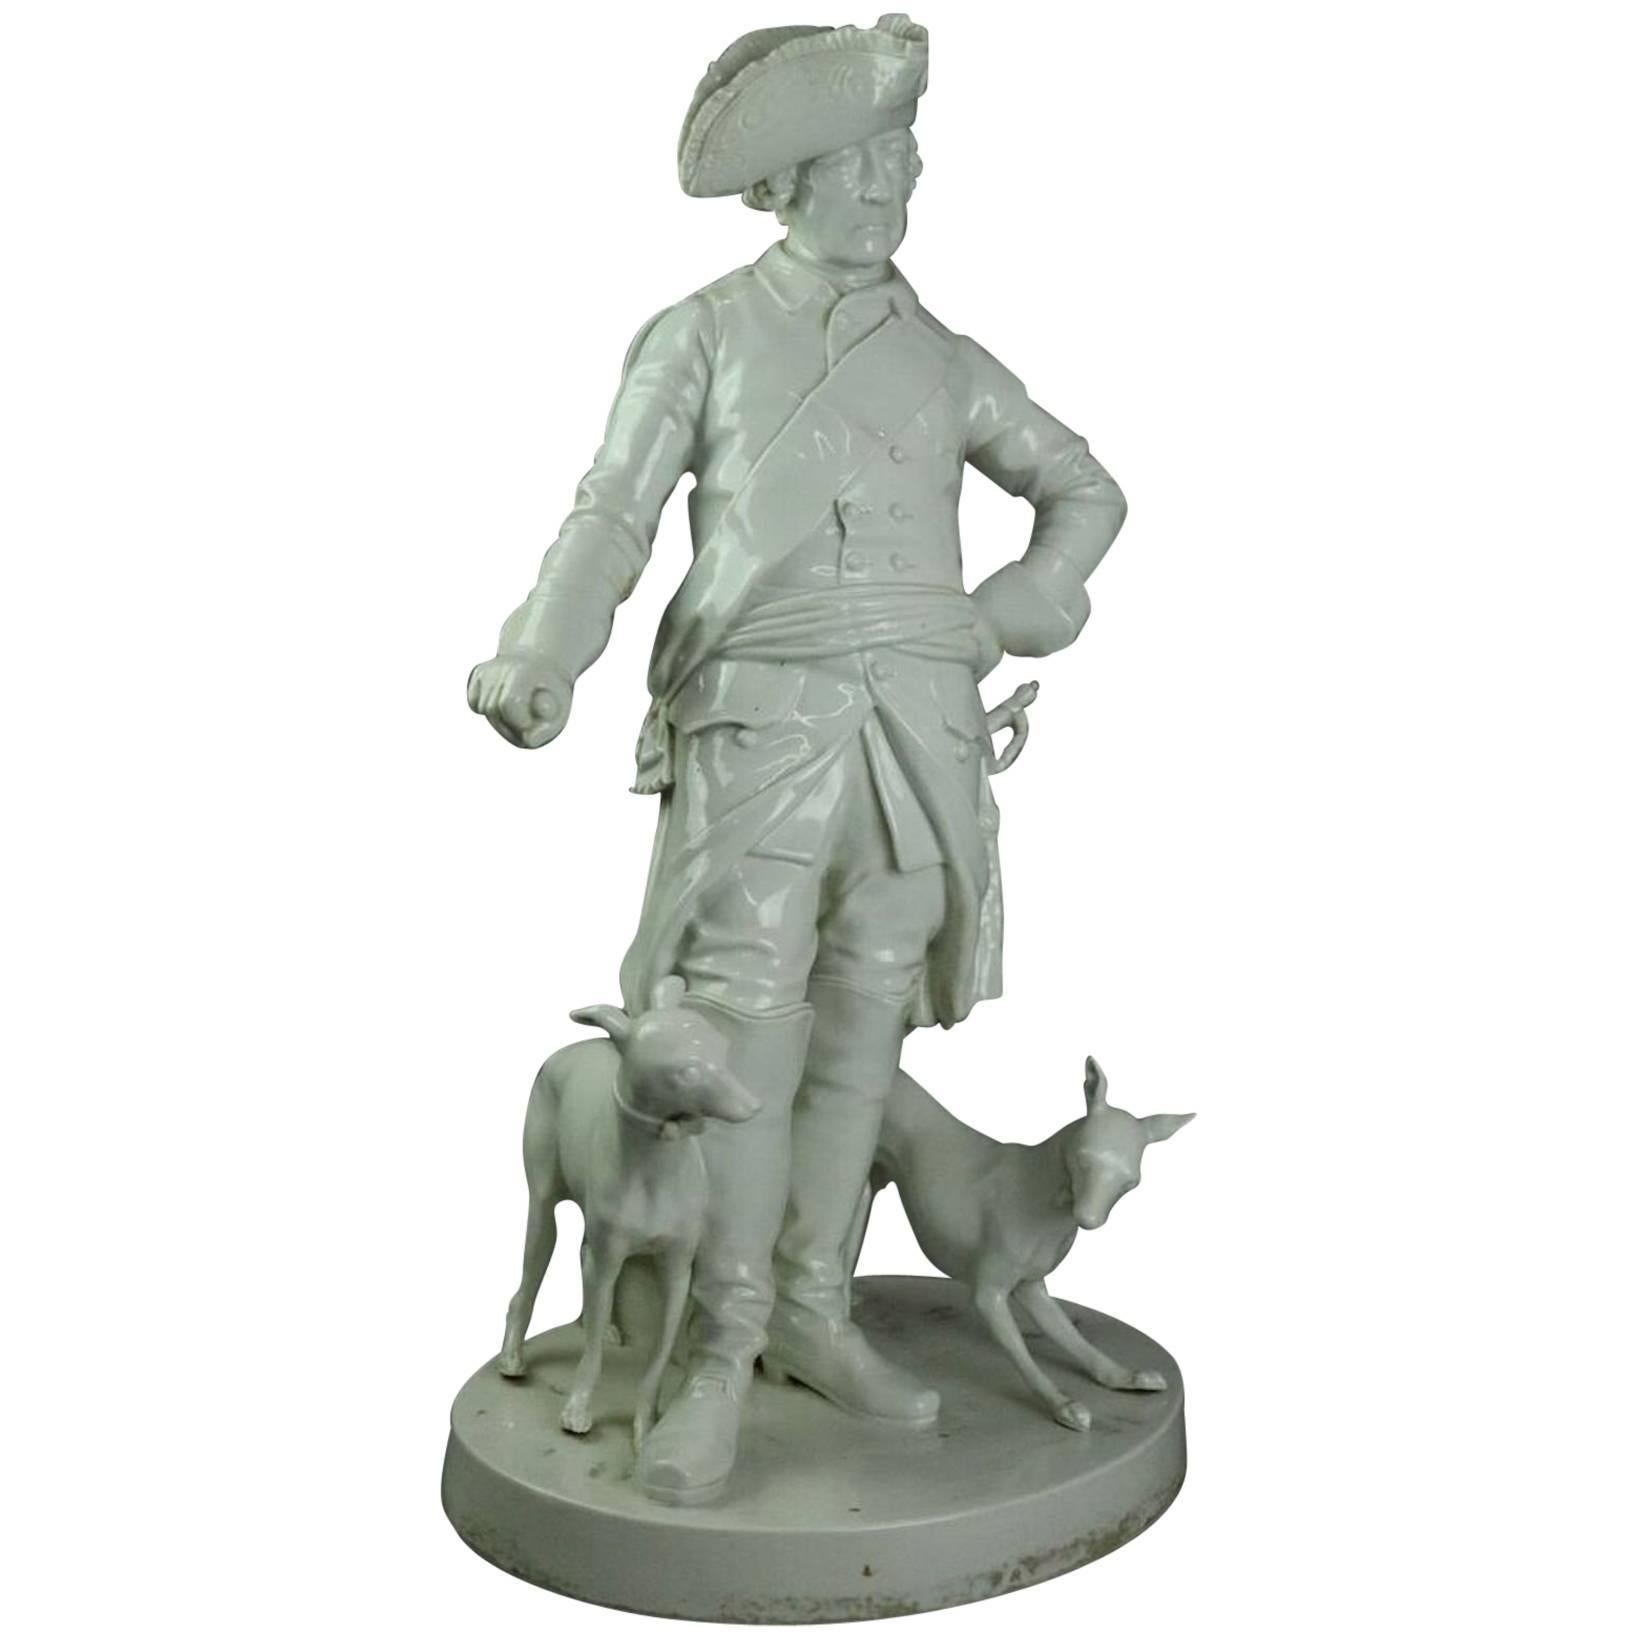 Antique "Frederick The Great Whippets" Blanc De Chine Sculpture, circa 1870